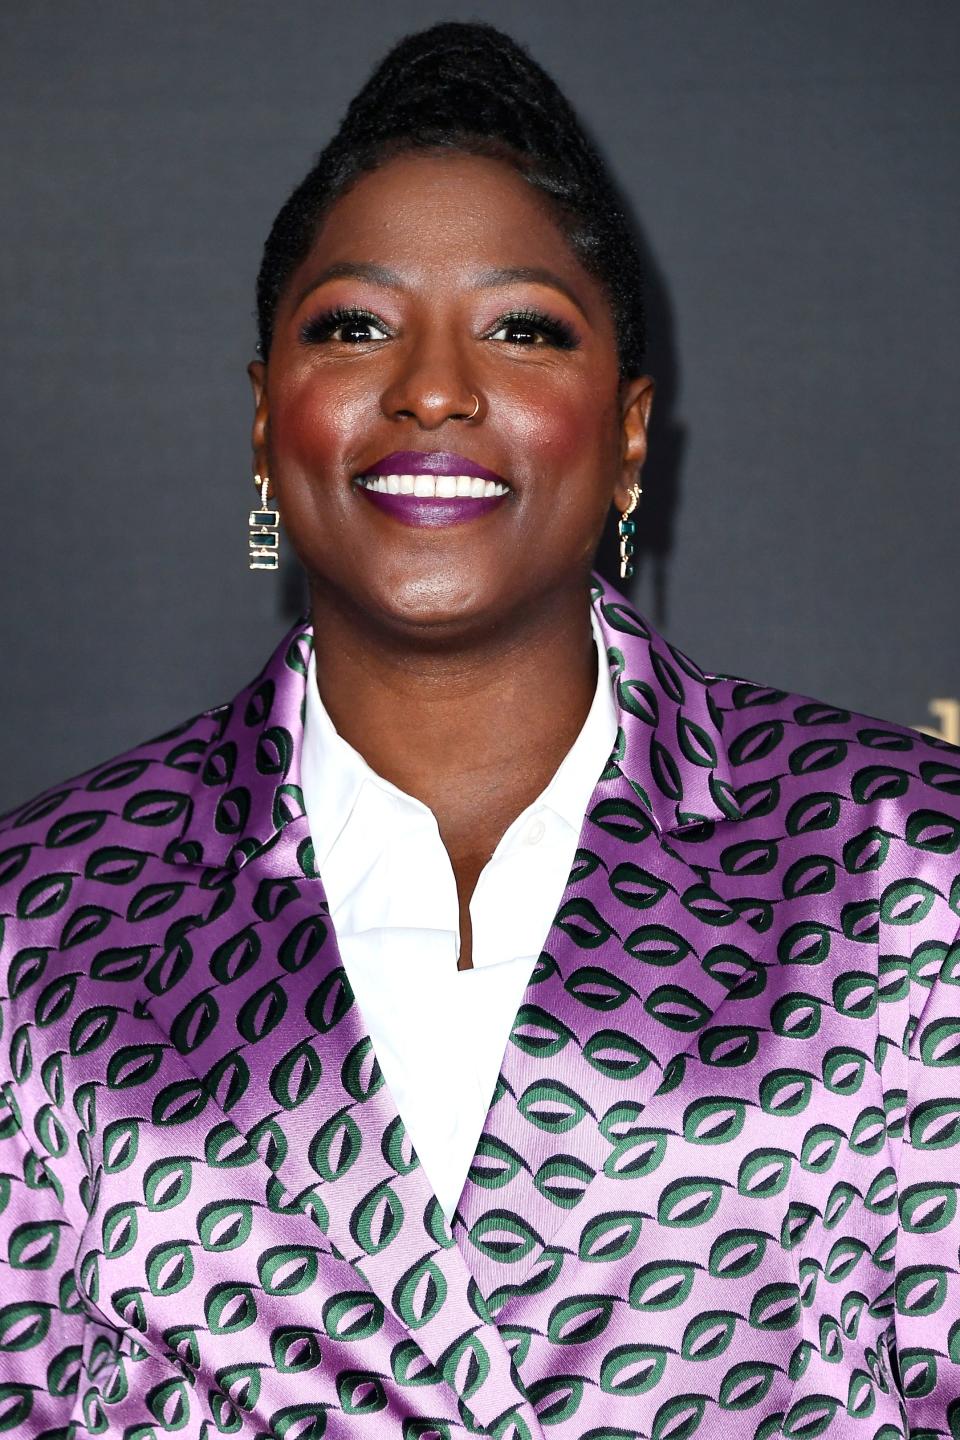 Rutina in a patterned blazer and white shirt smiling at a media event